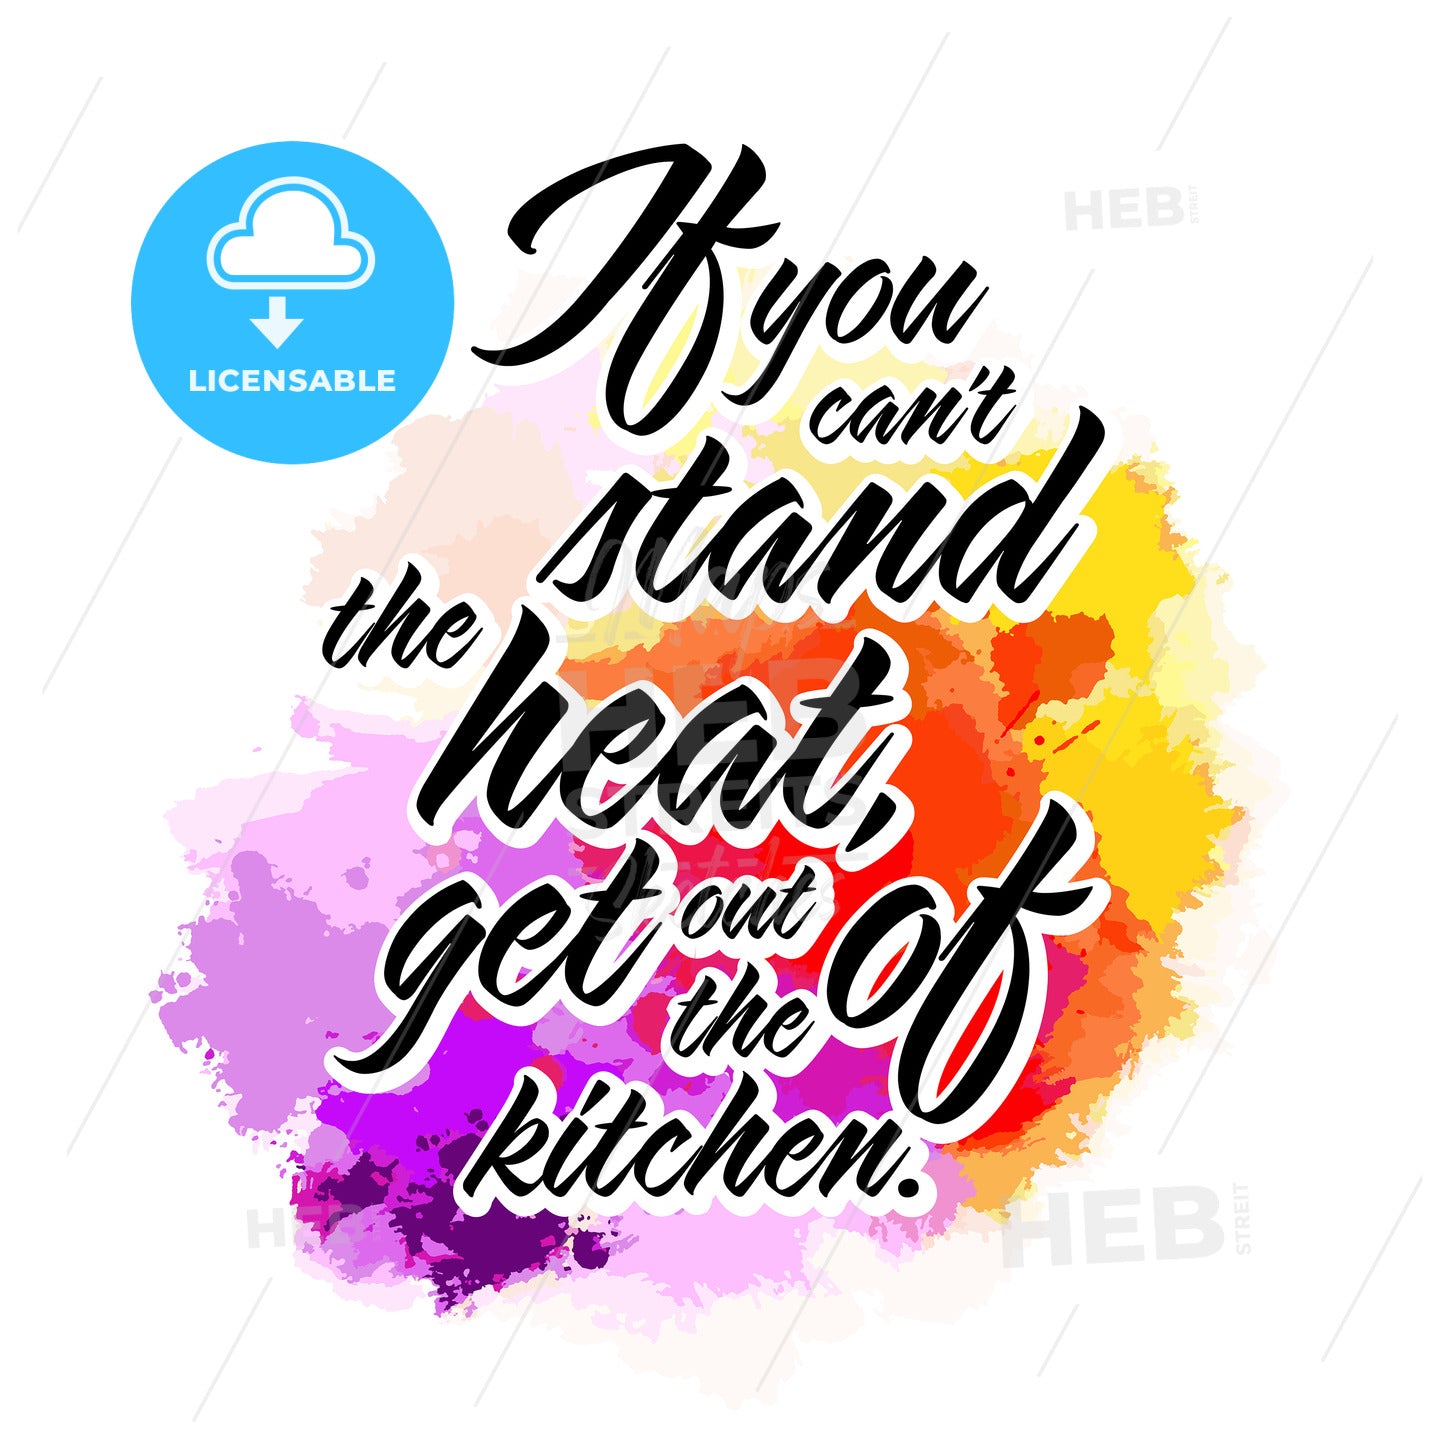 If You Cant Stand The Heat, Get Out Of The Kitchen. Lettering Design